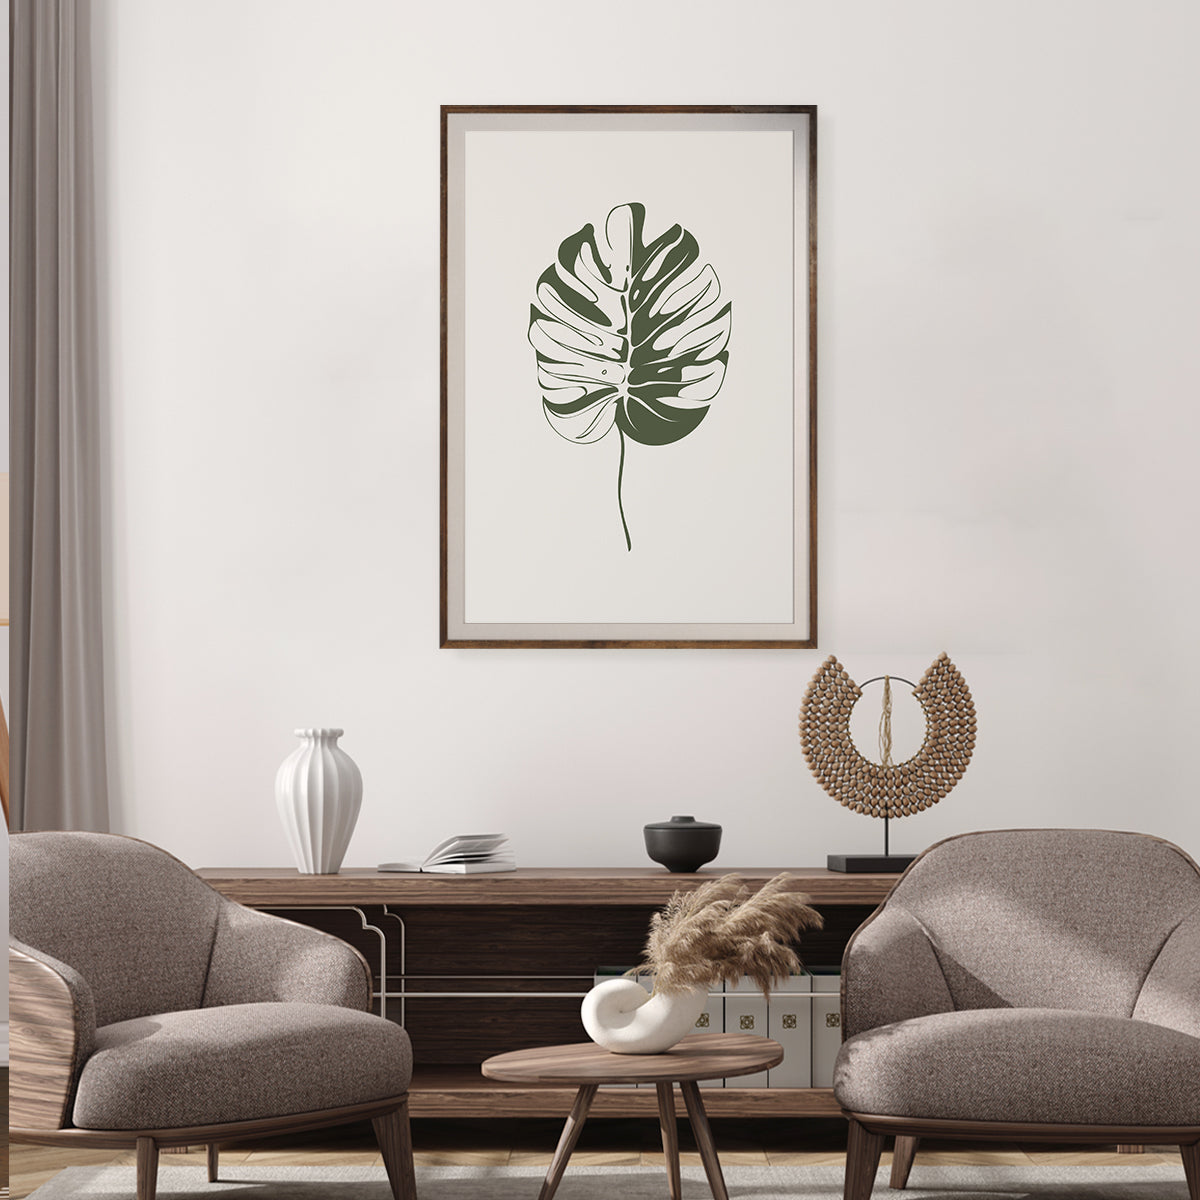 Minimalist Vintage Green Leaves Posters For Home Decor-Vertical Posters NOT FRAMED-CetArt-8″x10″ inches-CetArt